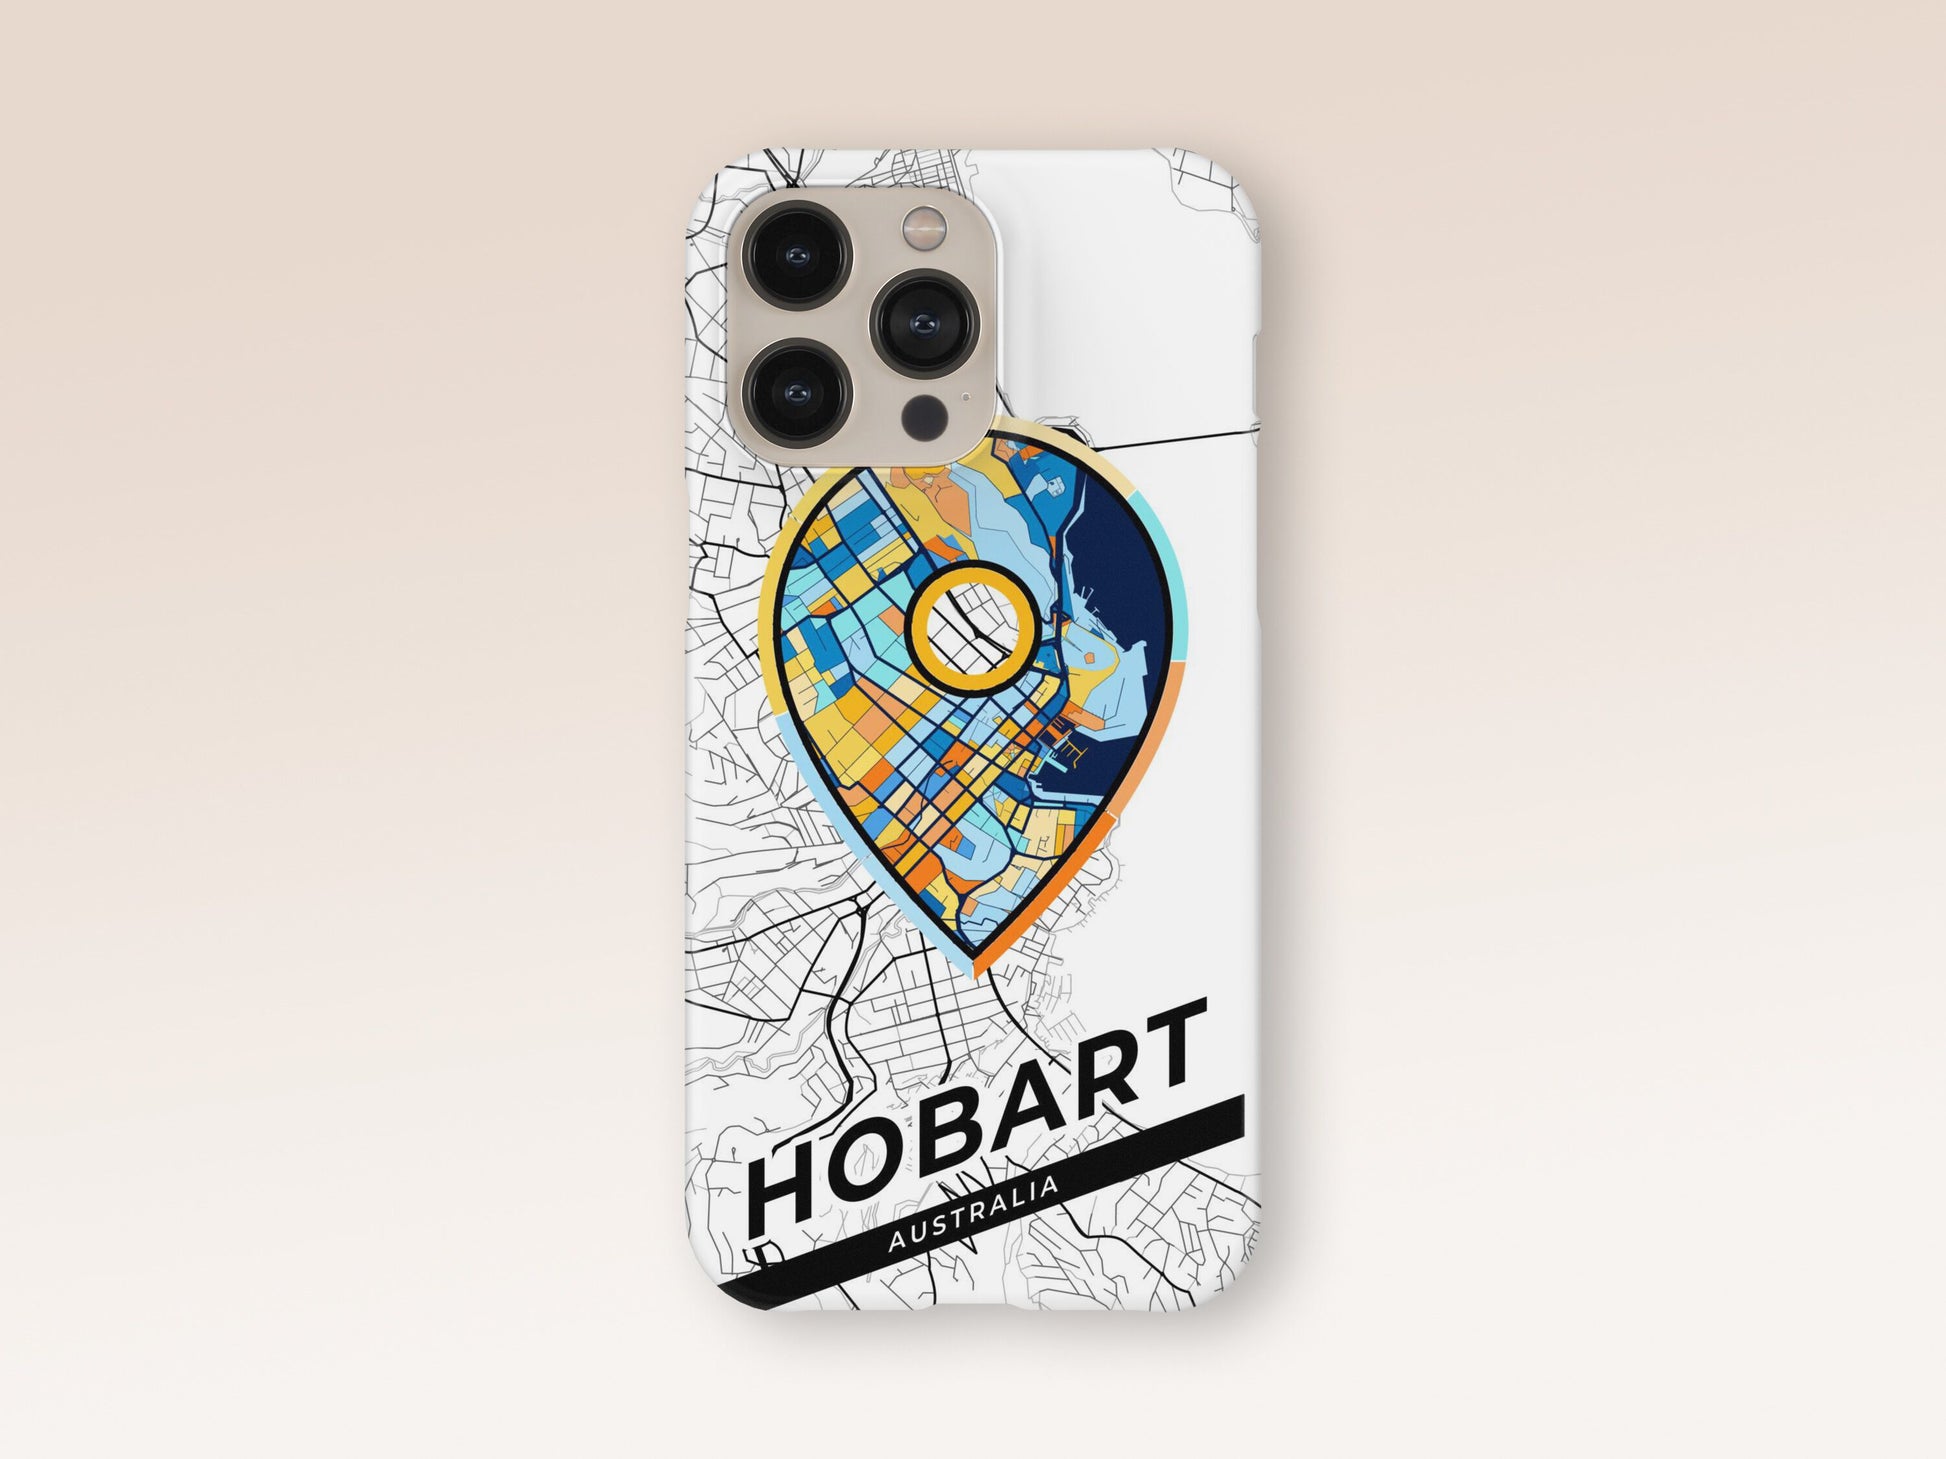 Hobart Australia slim phone case with colorful icon. Birthday, wedding or housewarming gift. Couple match cases. 1